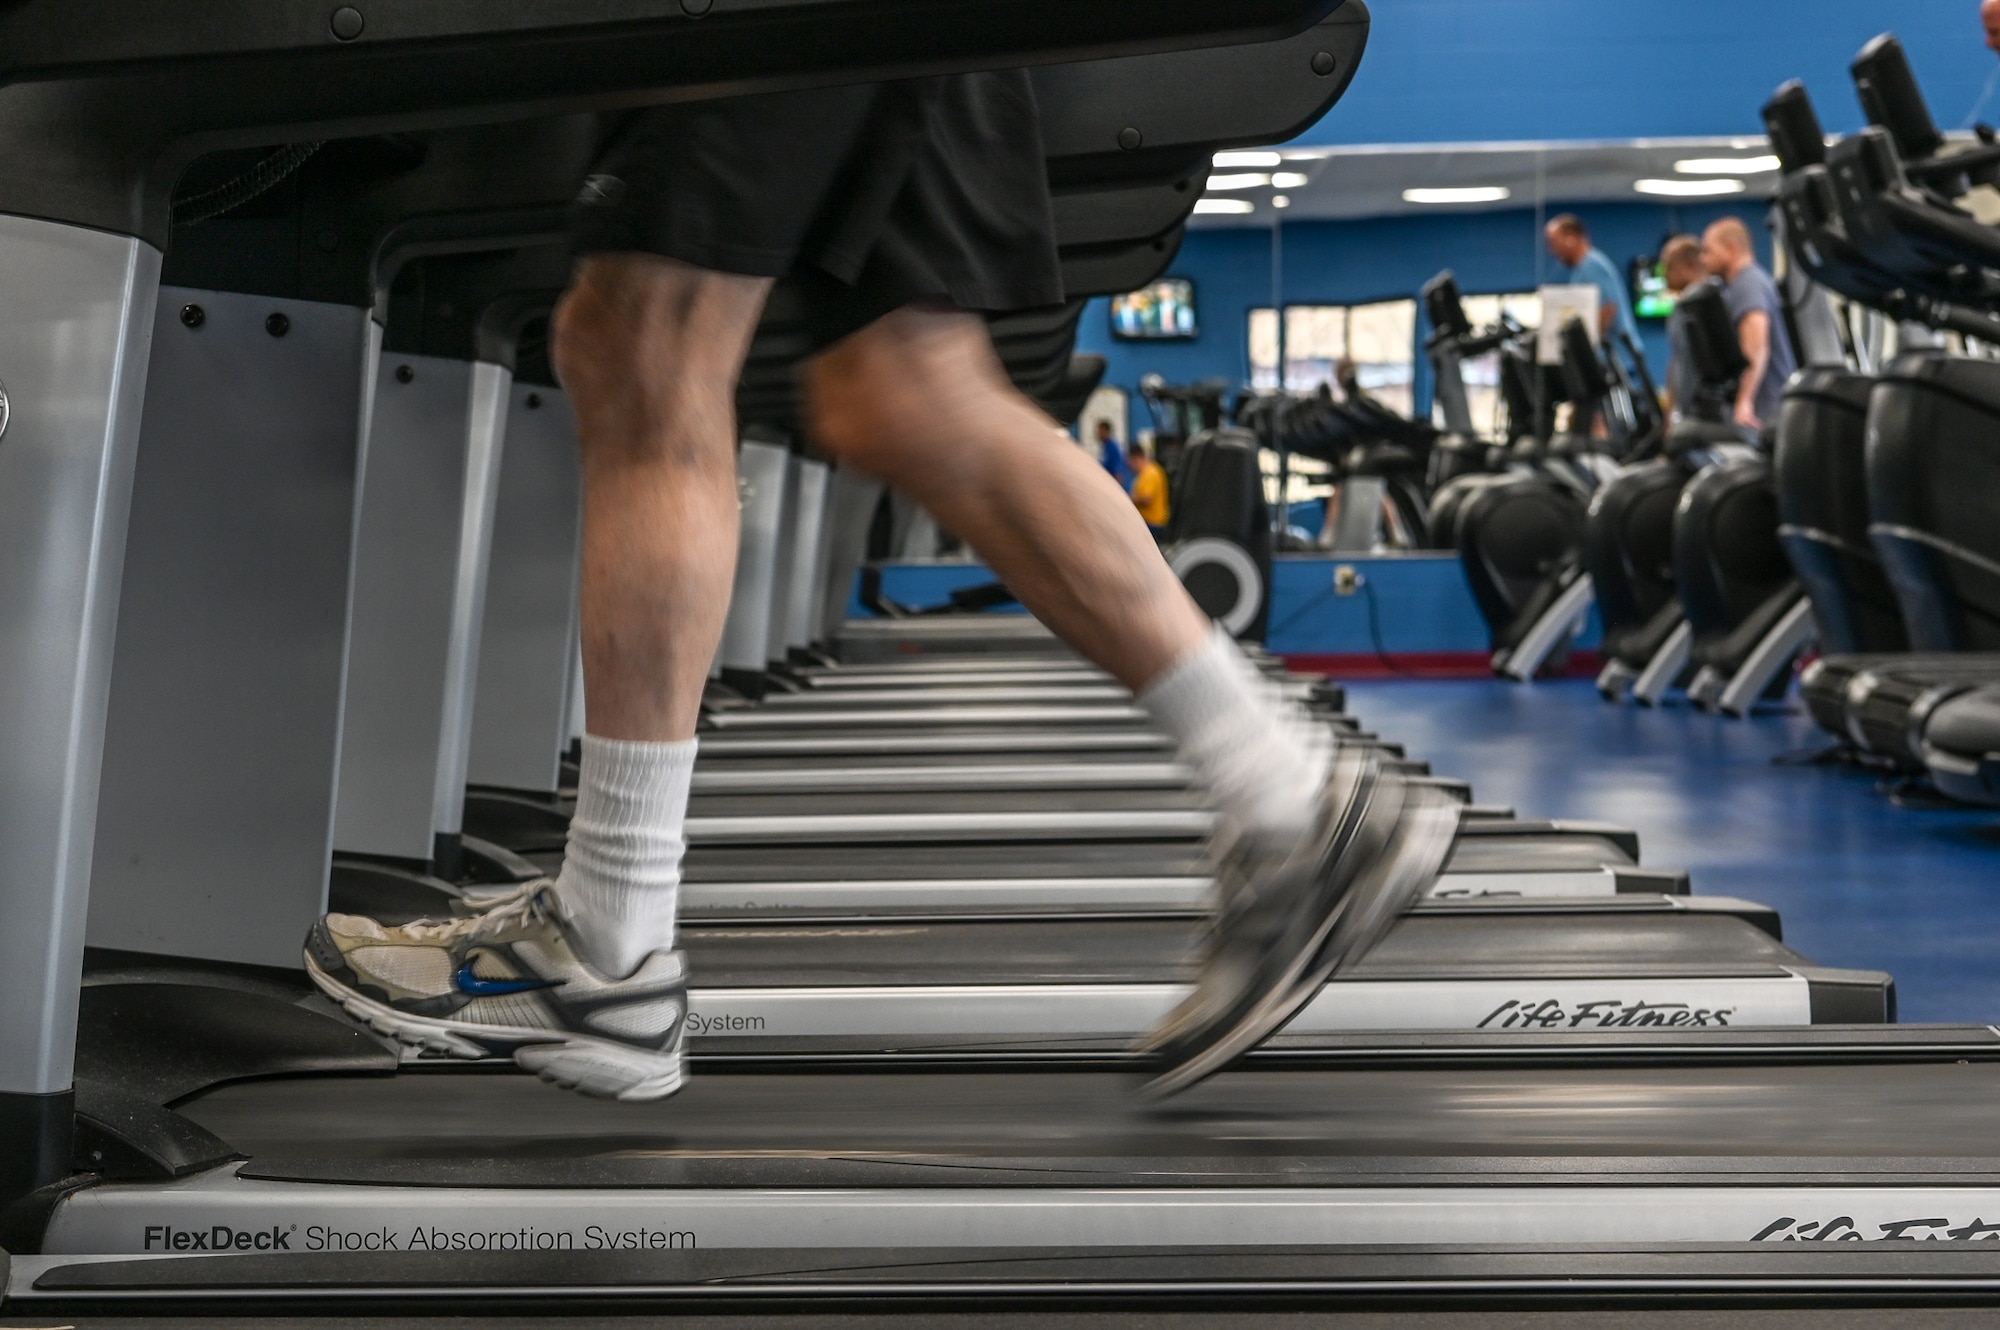 Peter Connelly runs on a treadmill in the cardio room at the Hanscom Fitness and Sports Center Jan. 10. The facility is open Monday through Friday from 5 a.m. to 9 p.m. and weekends and holidays from 8 a.m. to 3 p.m. 24/7 access is available and requires registration. More information is available at www.hanscomfss.com/fitness-sports-center or at 781-225-6630.  (U.S. Air Force Photo by Mark Herlihy)